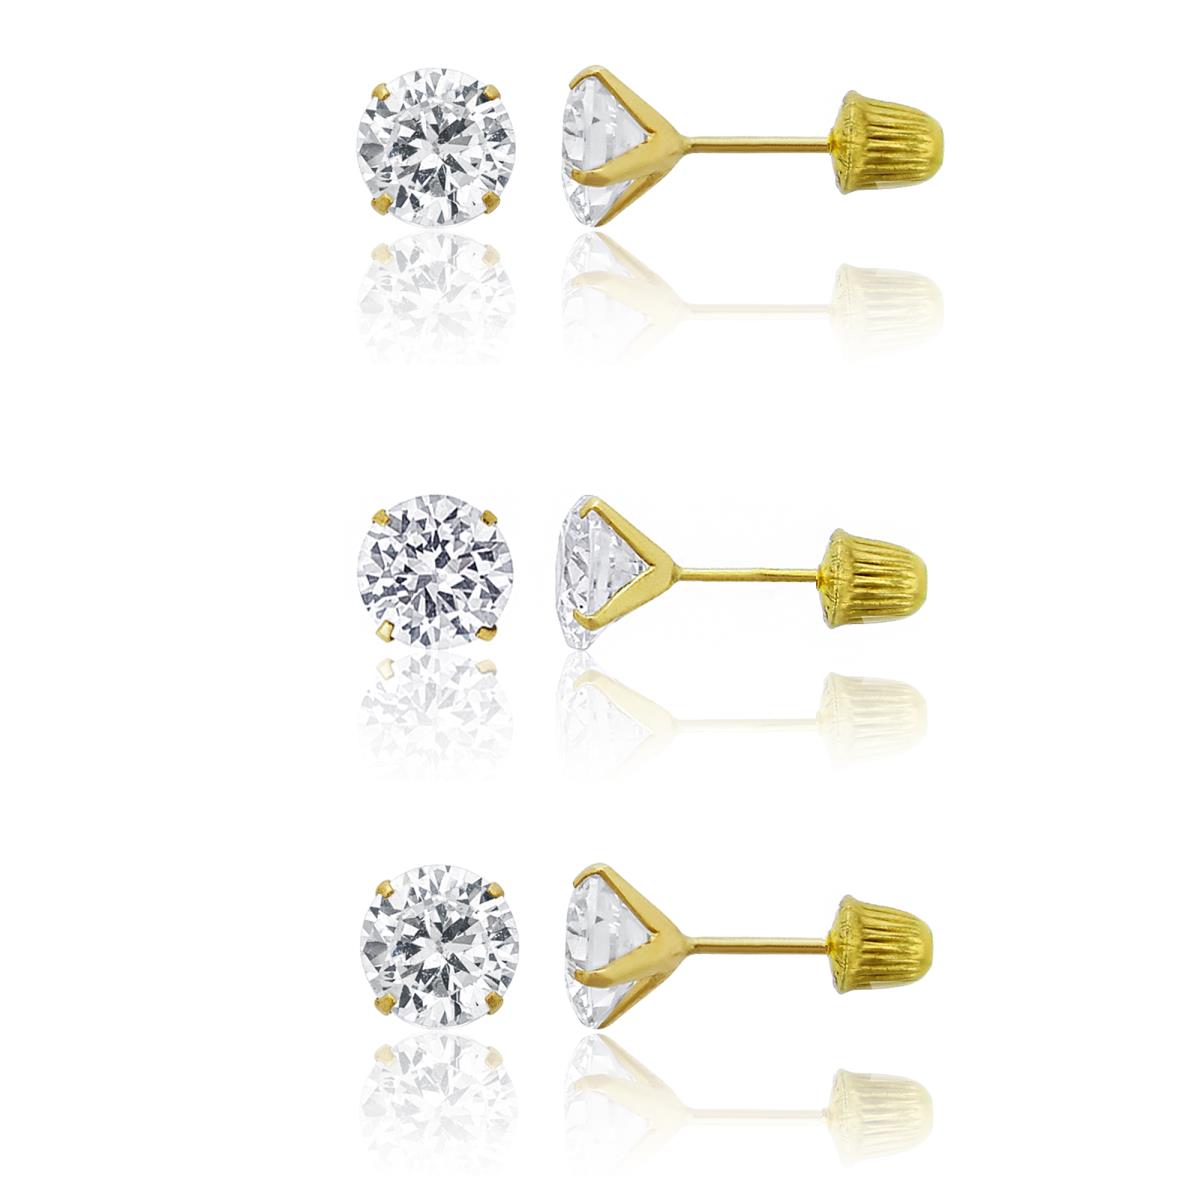 14K Yellow Gold 5mm/6mm/7mm Round Solitaire Ball Screw Back Earring Set